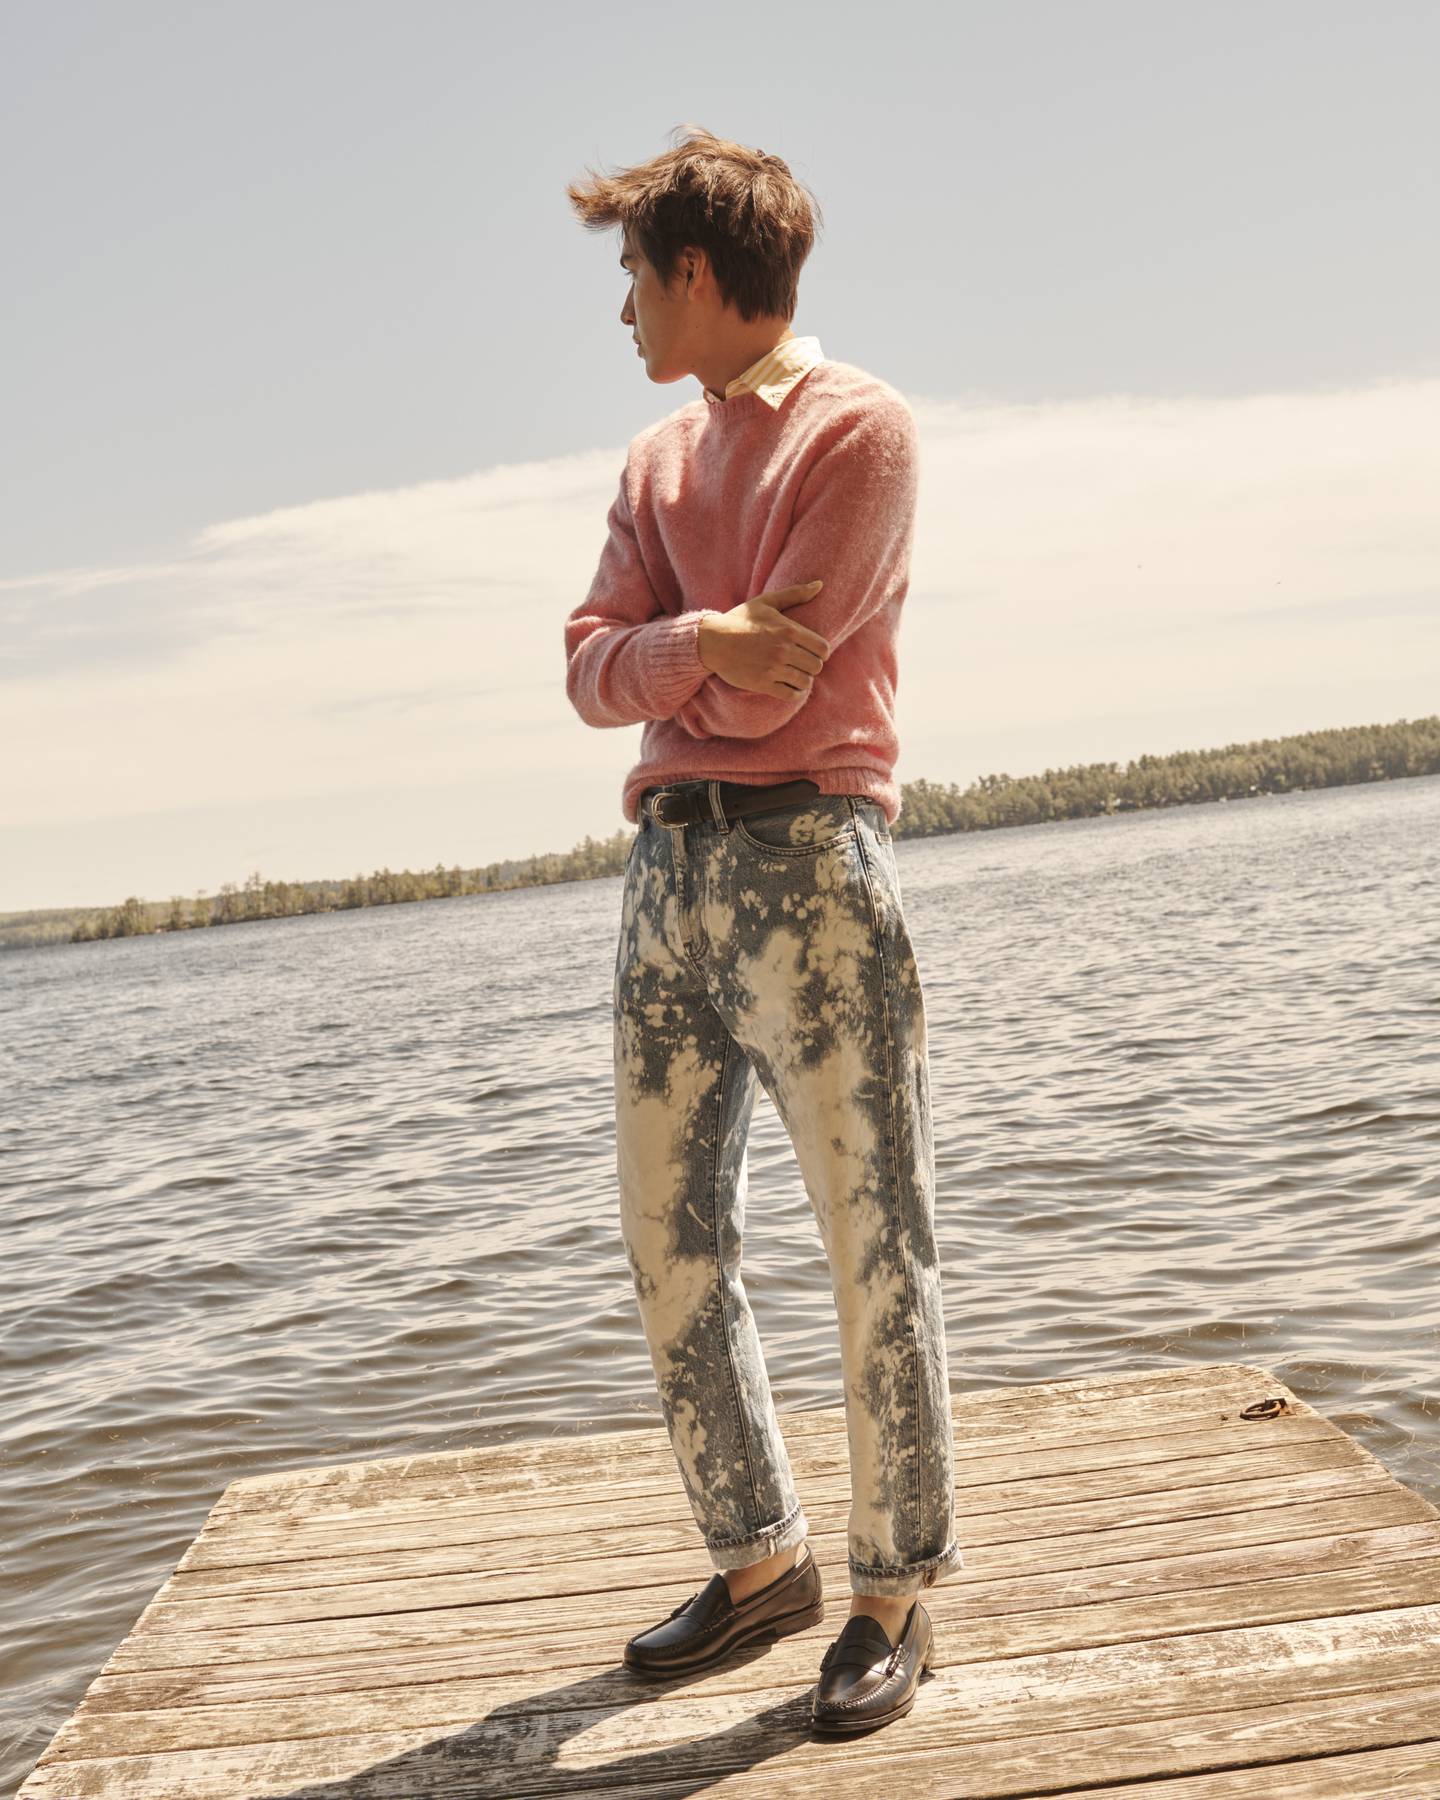 Blond model wearing acid wash jeans standing on dock in front of lake.